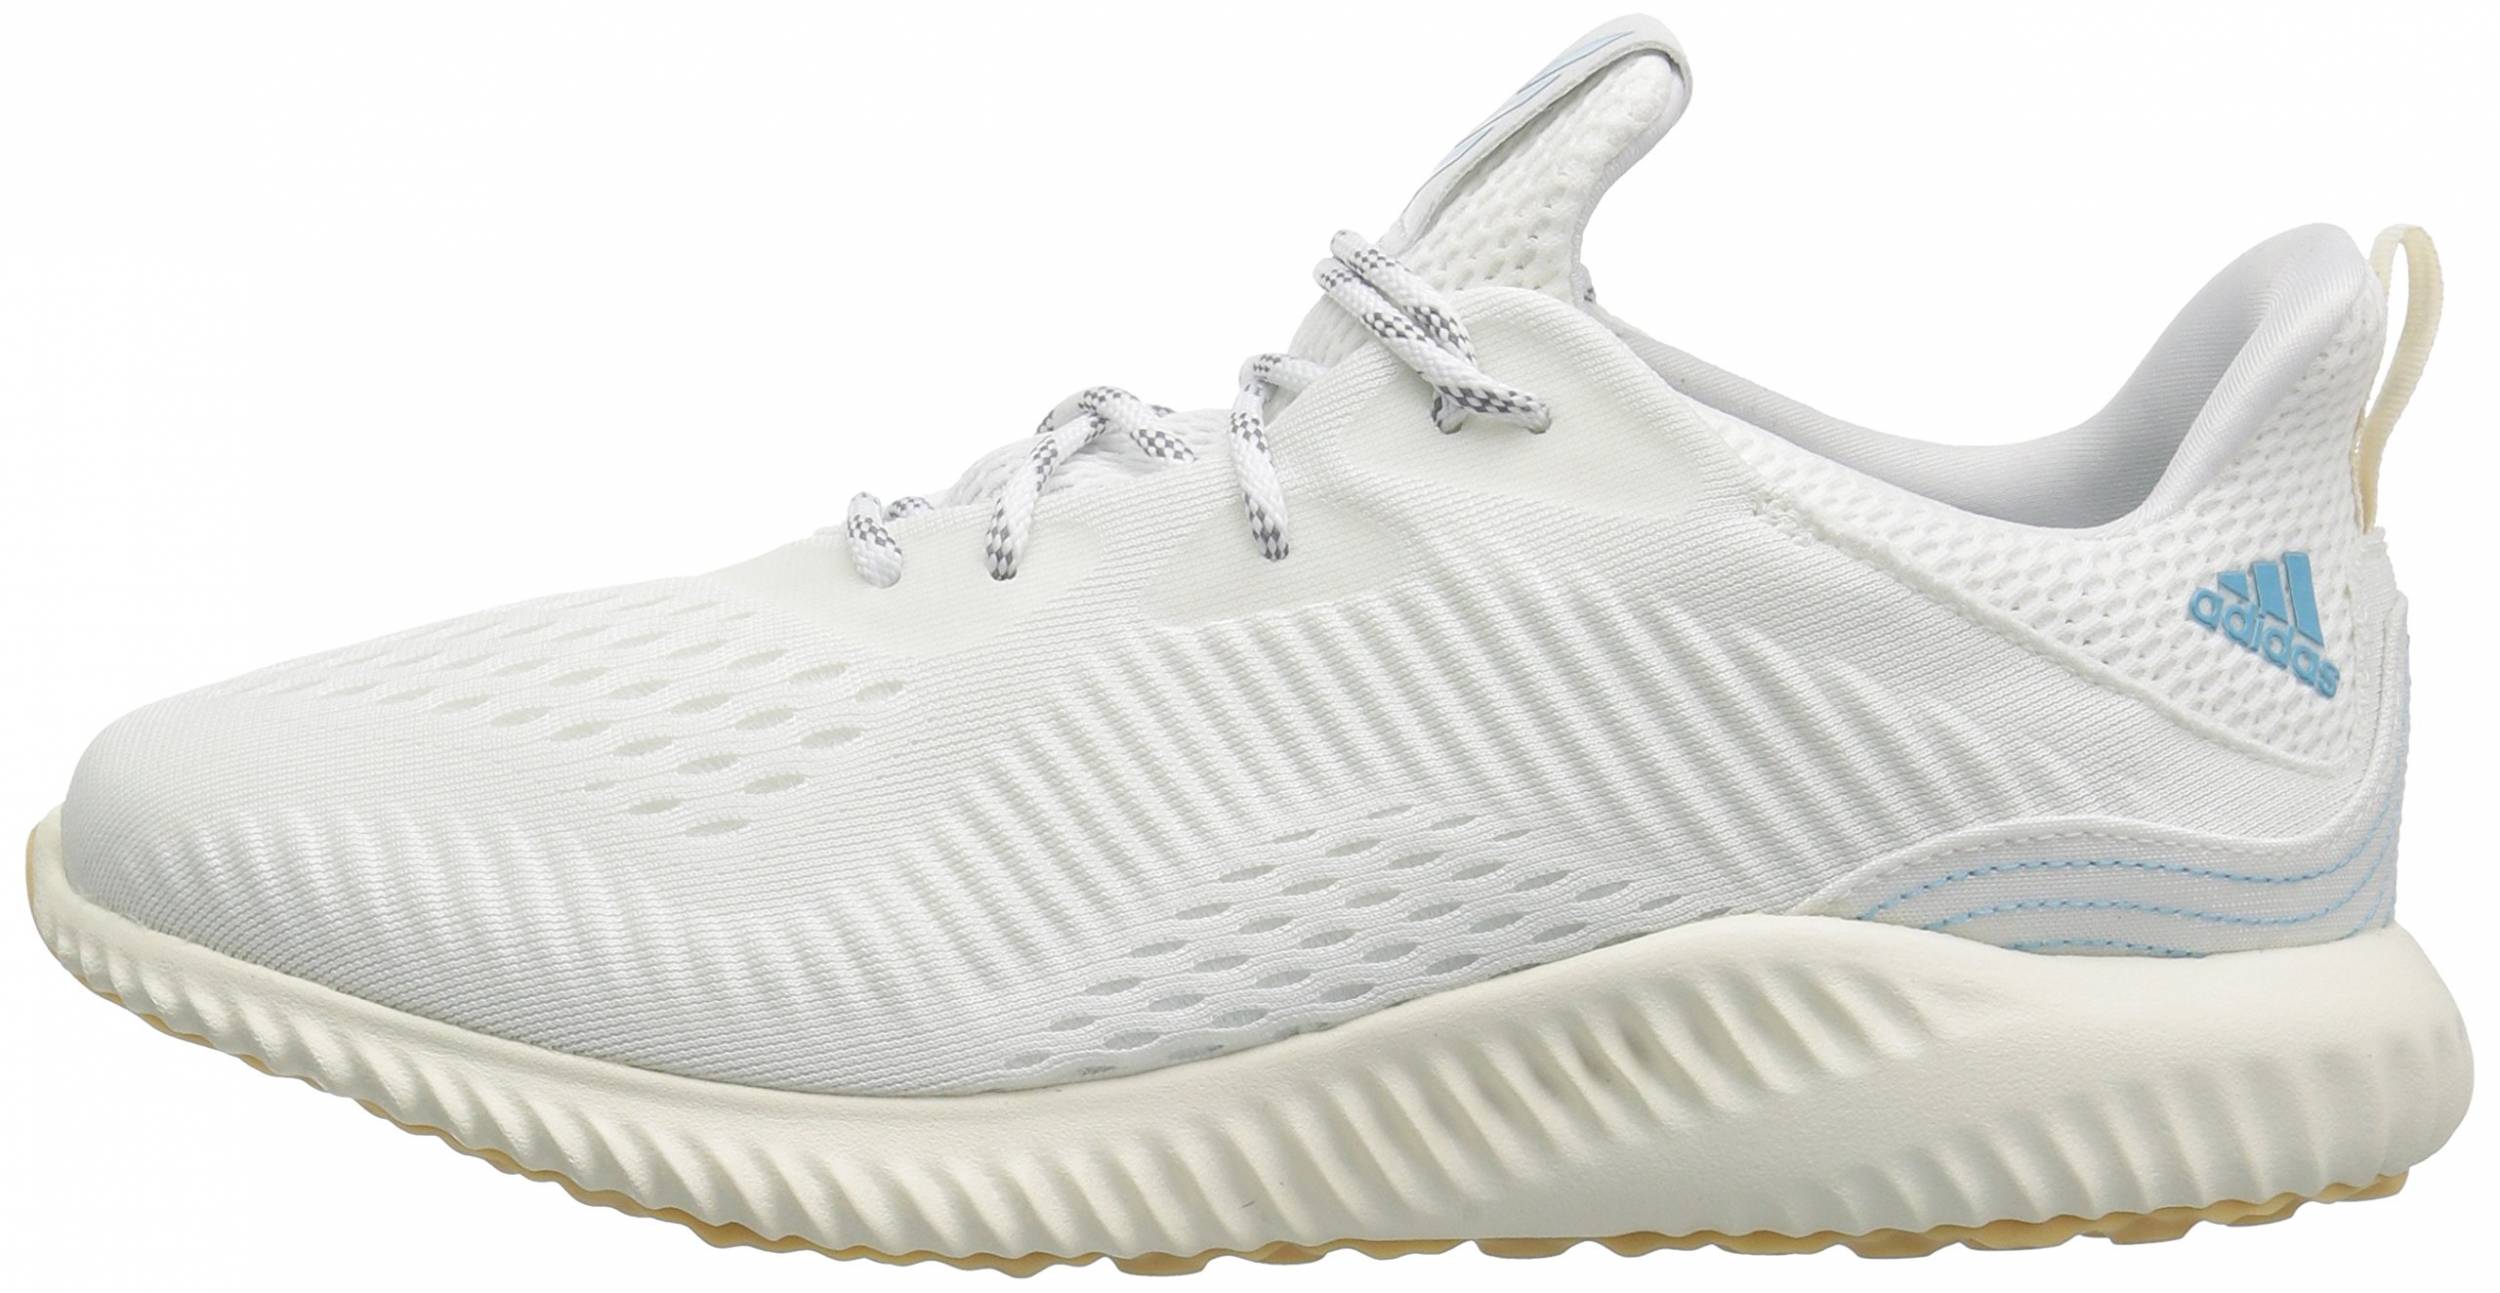 Adidas Alphabounce Women's Price On Sale, UP TO 60% OFF